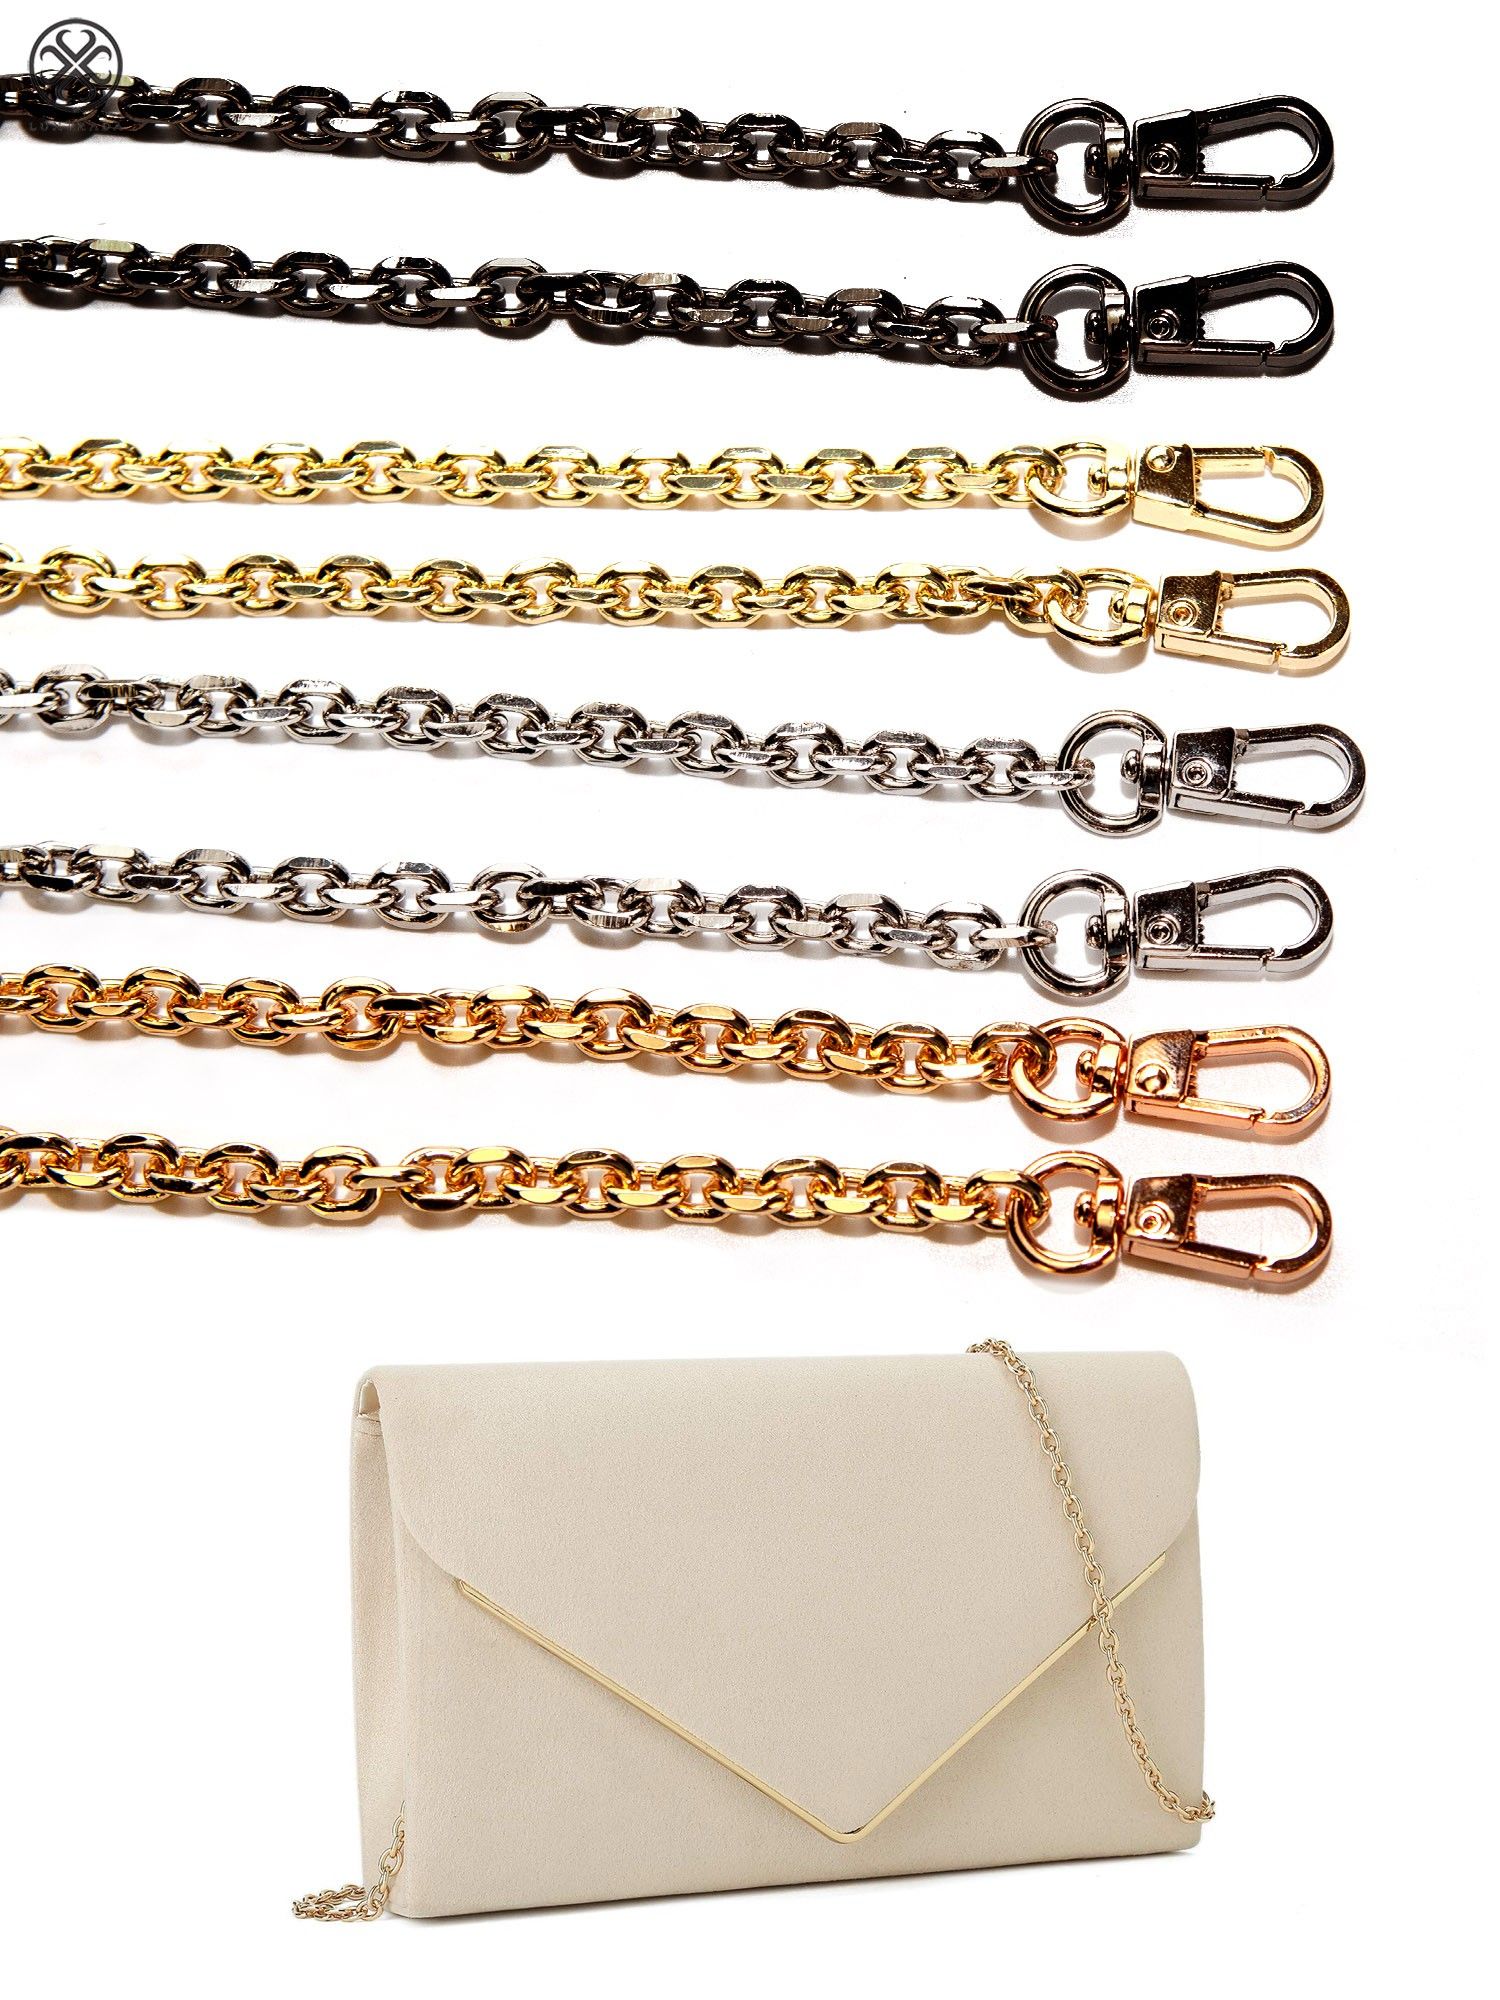 Luxtrada 47 Purse Chain Strap-Handbags Replacement Chains Metal Chain  Strap for Wallet Bag Crossbody Shoulder Chain Gold